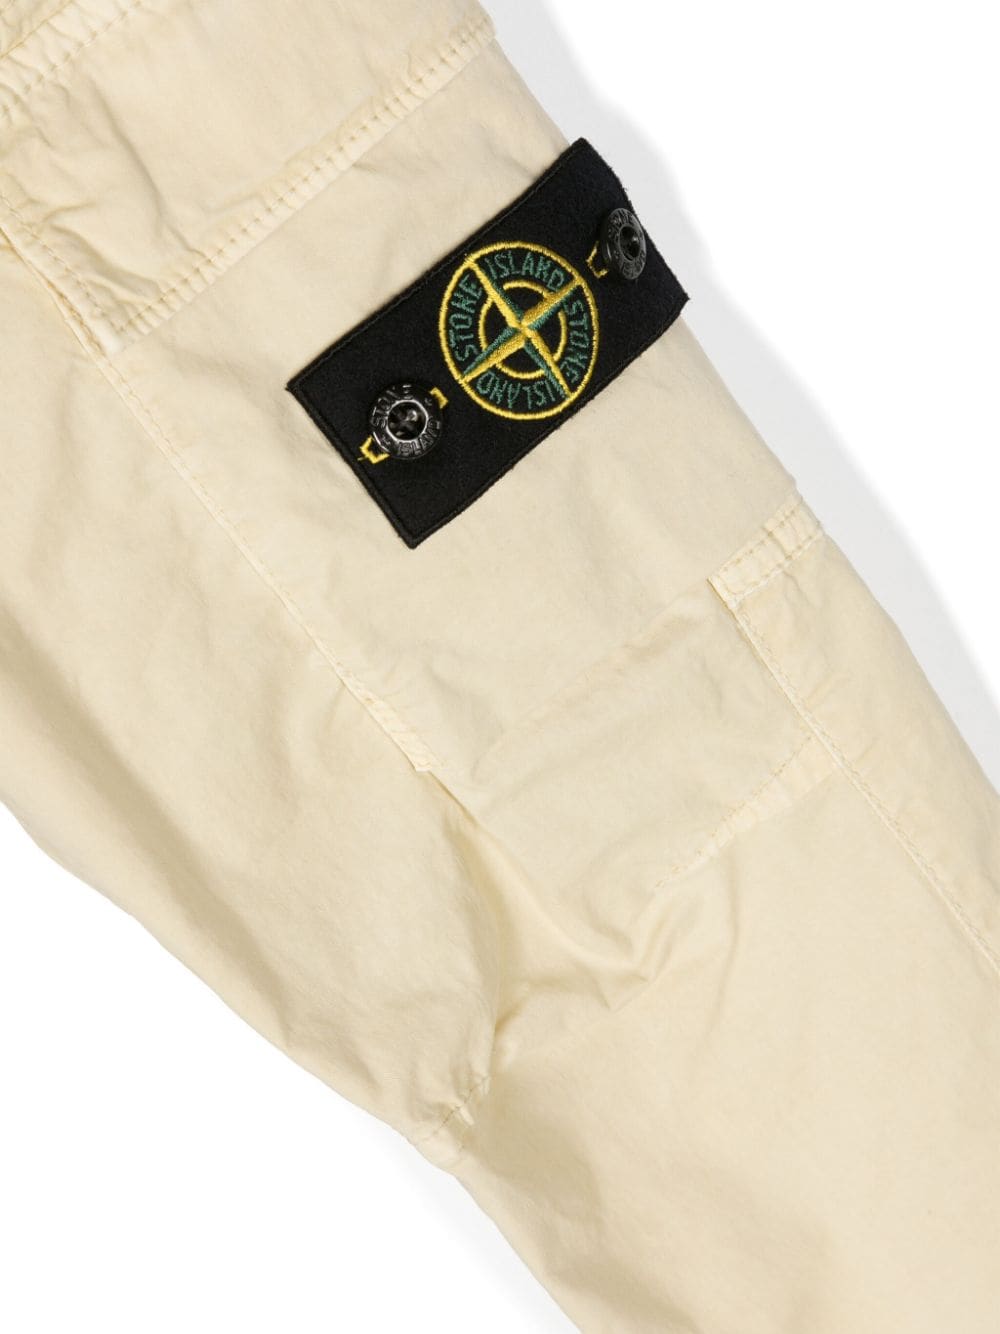 Beige trousers for boys with logo